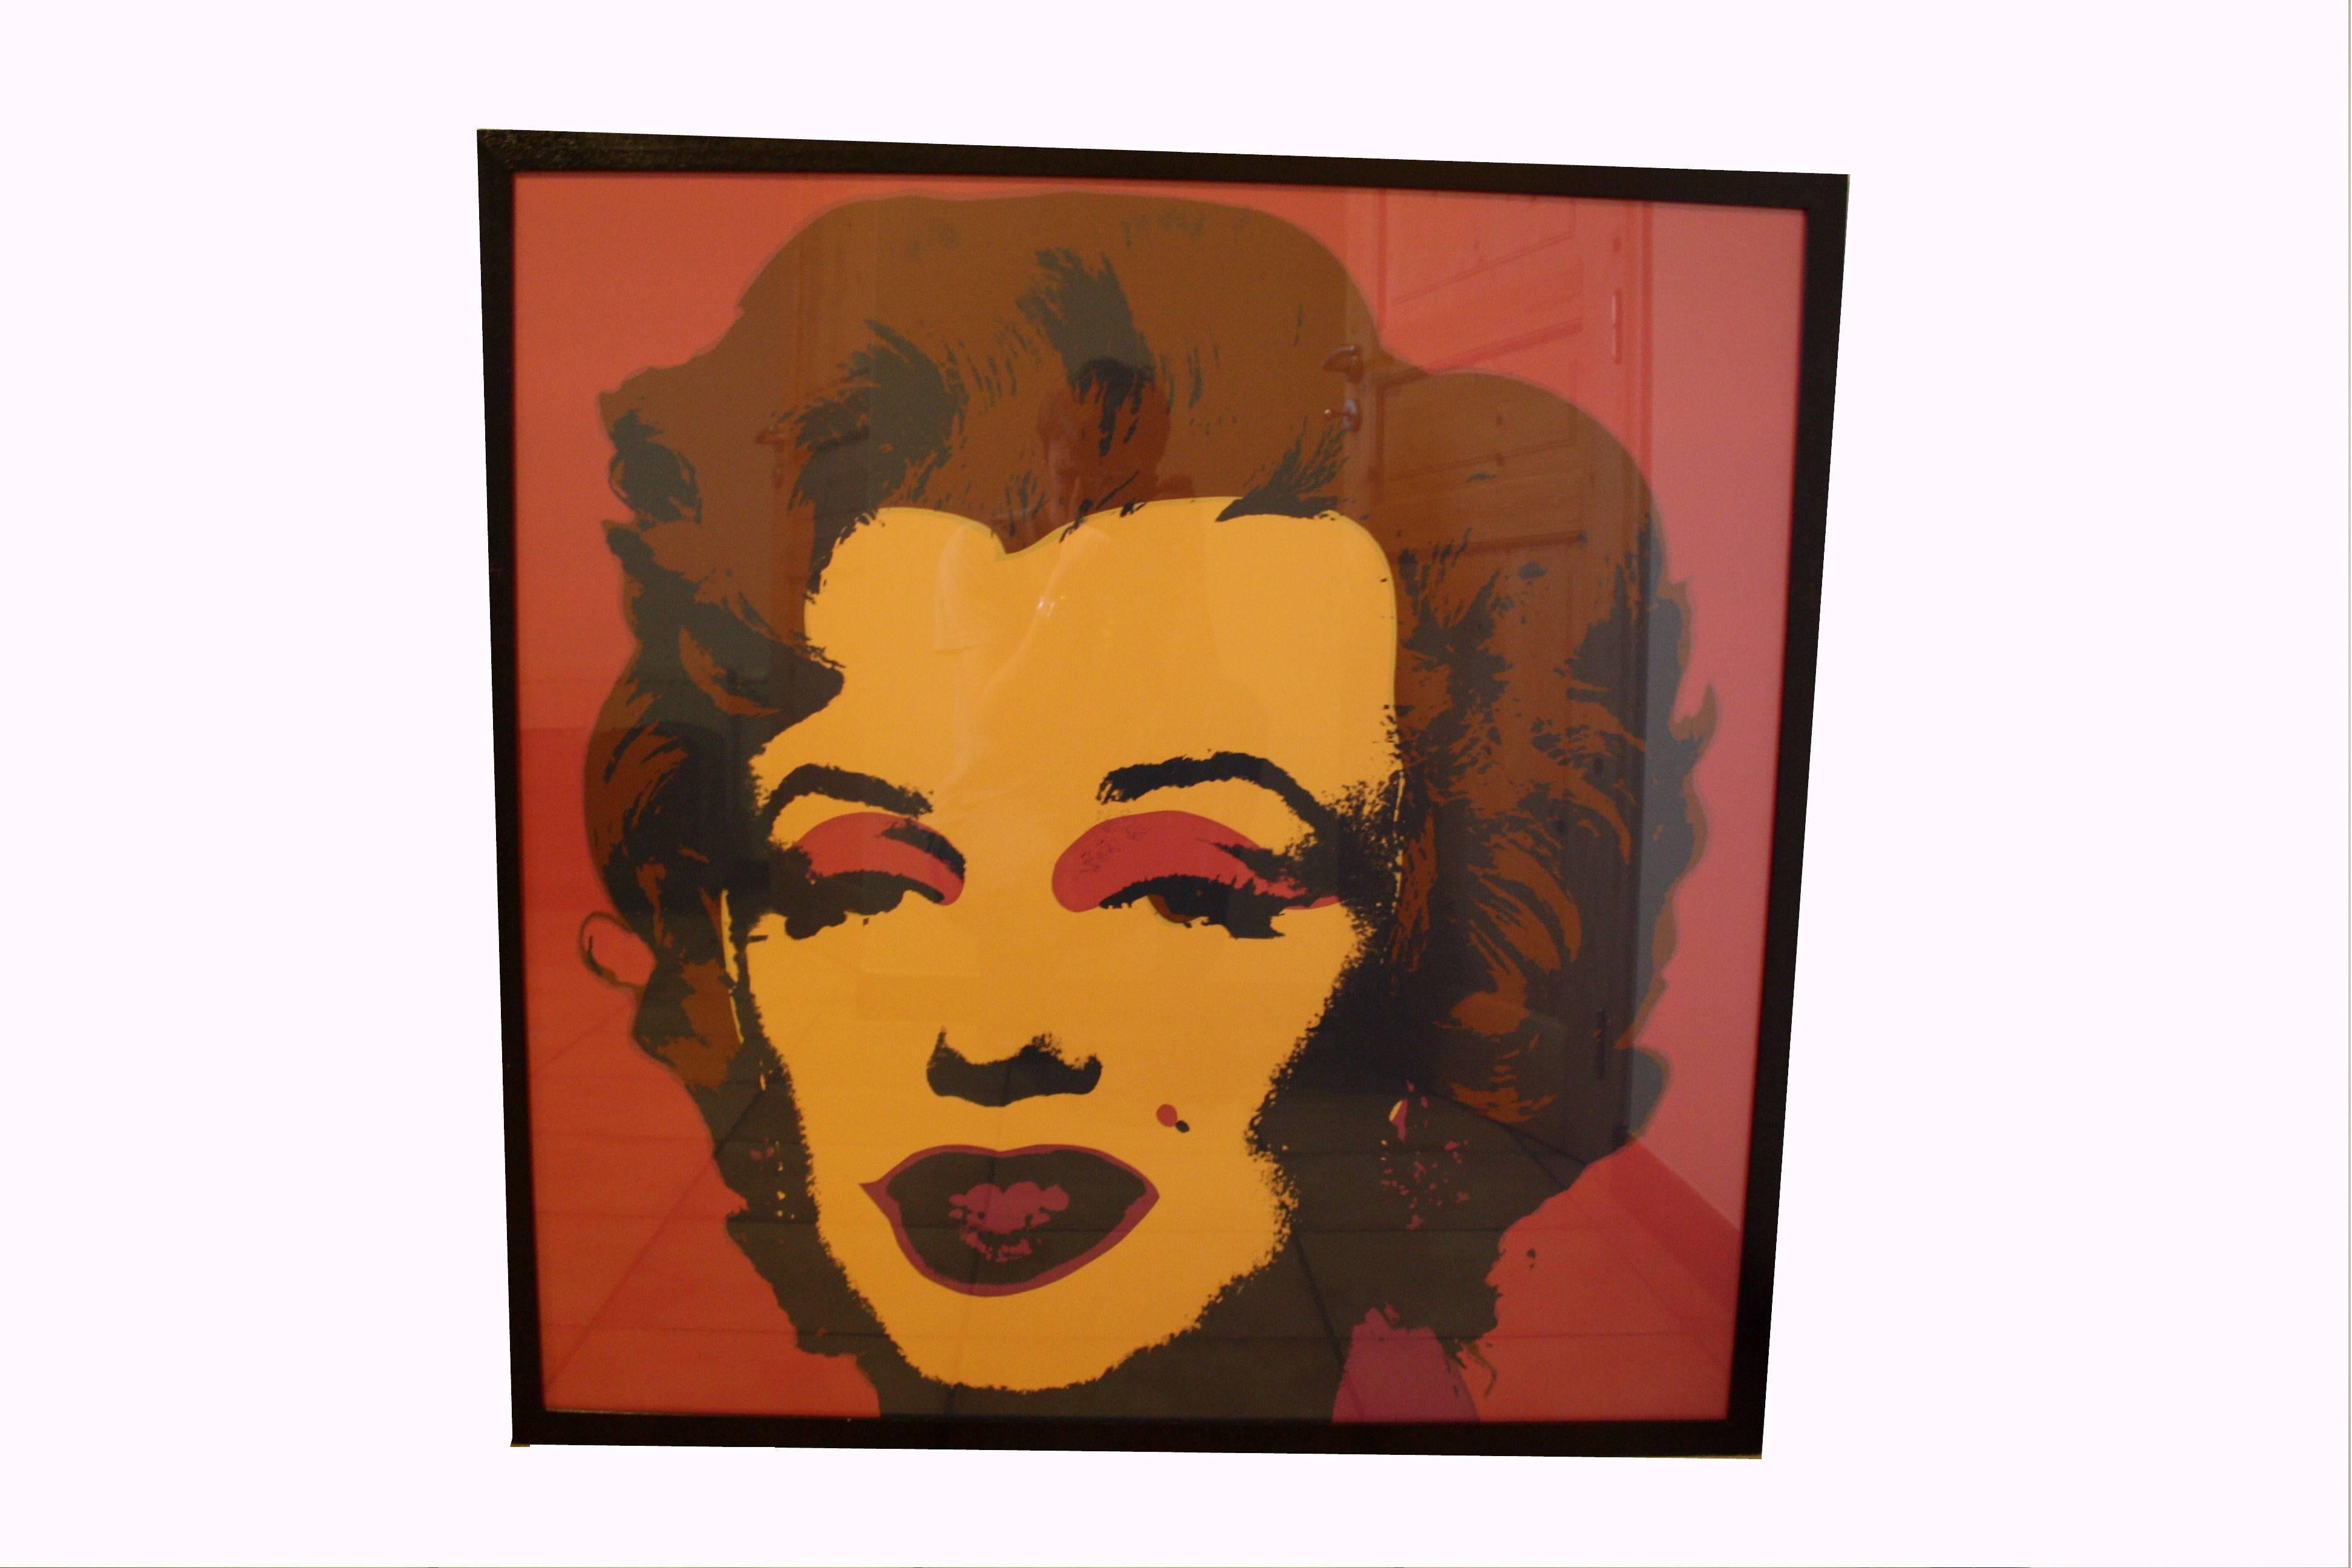 screen-print of one of Andy Warhol's most iconic works. This Marilyn Monroe screen-print is published by Sunday B. morning.

It is printed using the original screens obtained from Andy Warhol in the early 1970s.

Silkscreen in colors printed on